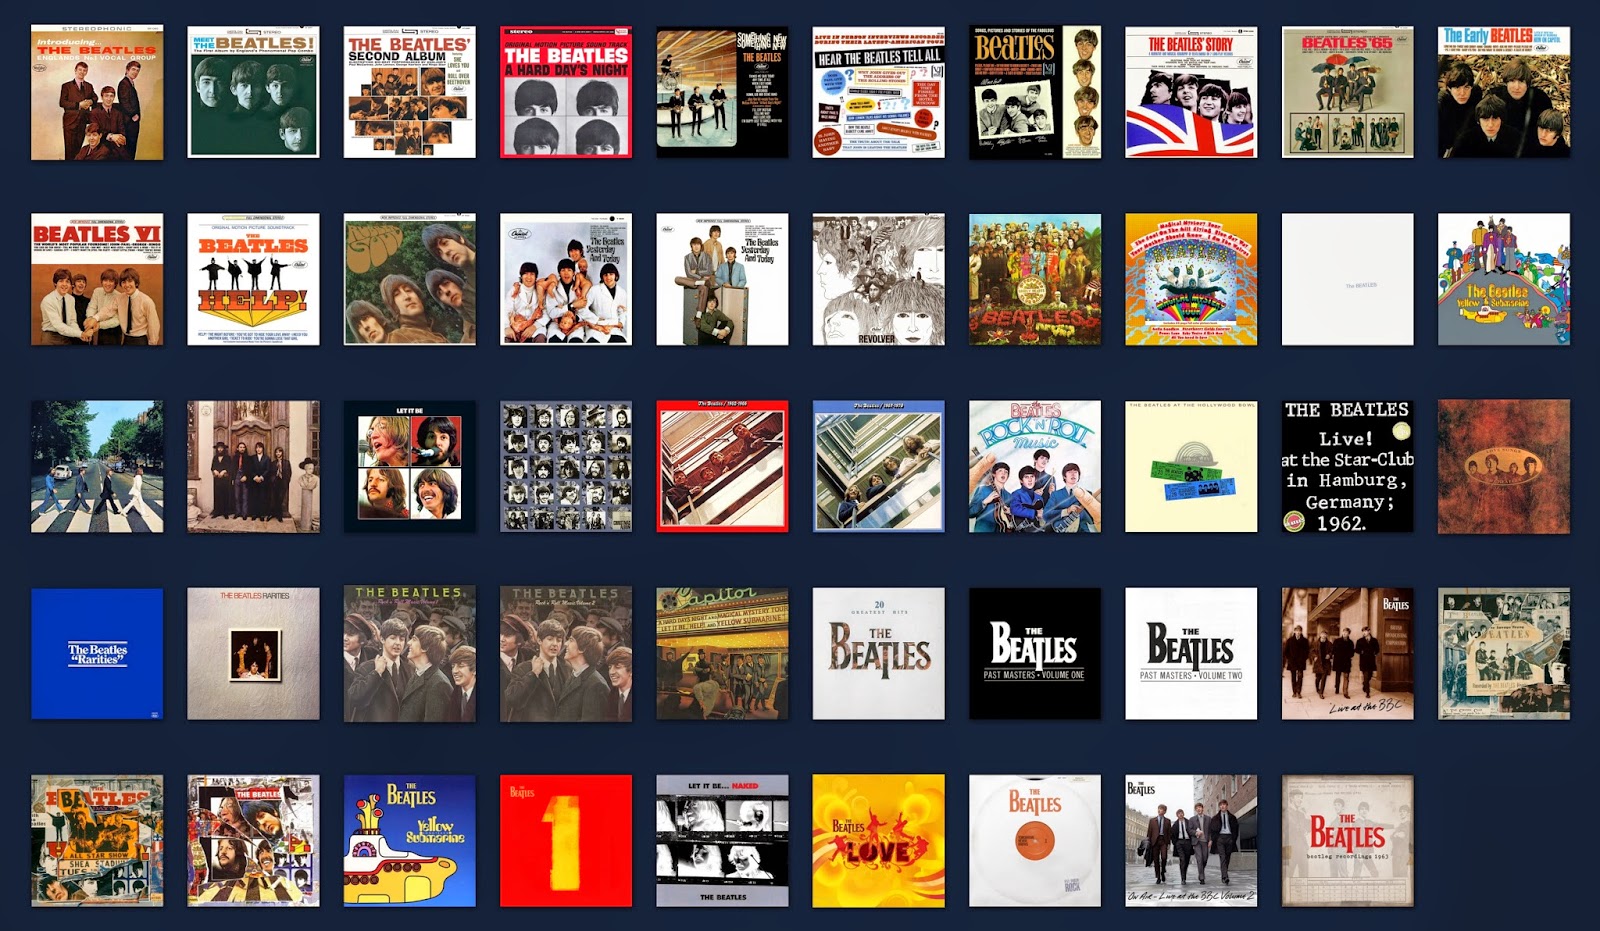 The Beatles Illustrated UK Discography: The Beatles US Album Chart